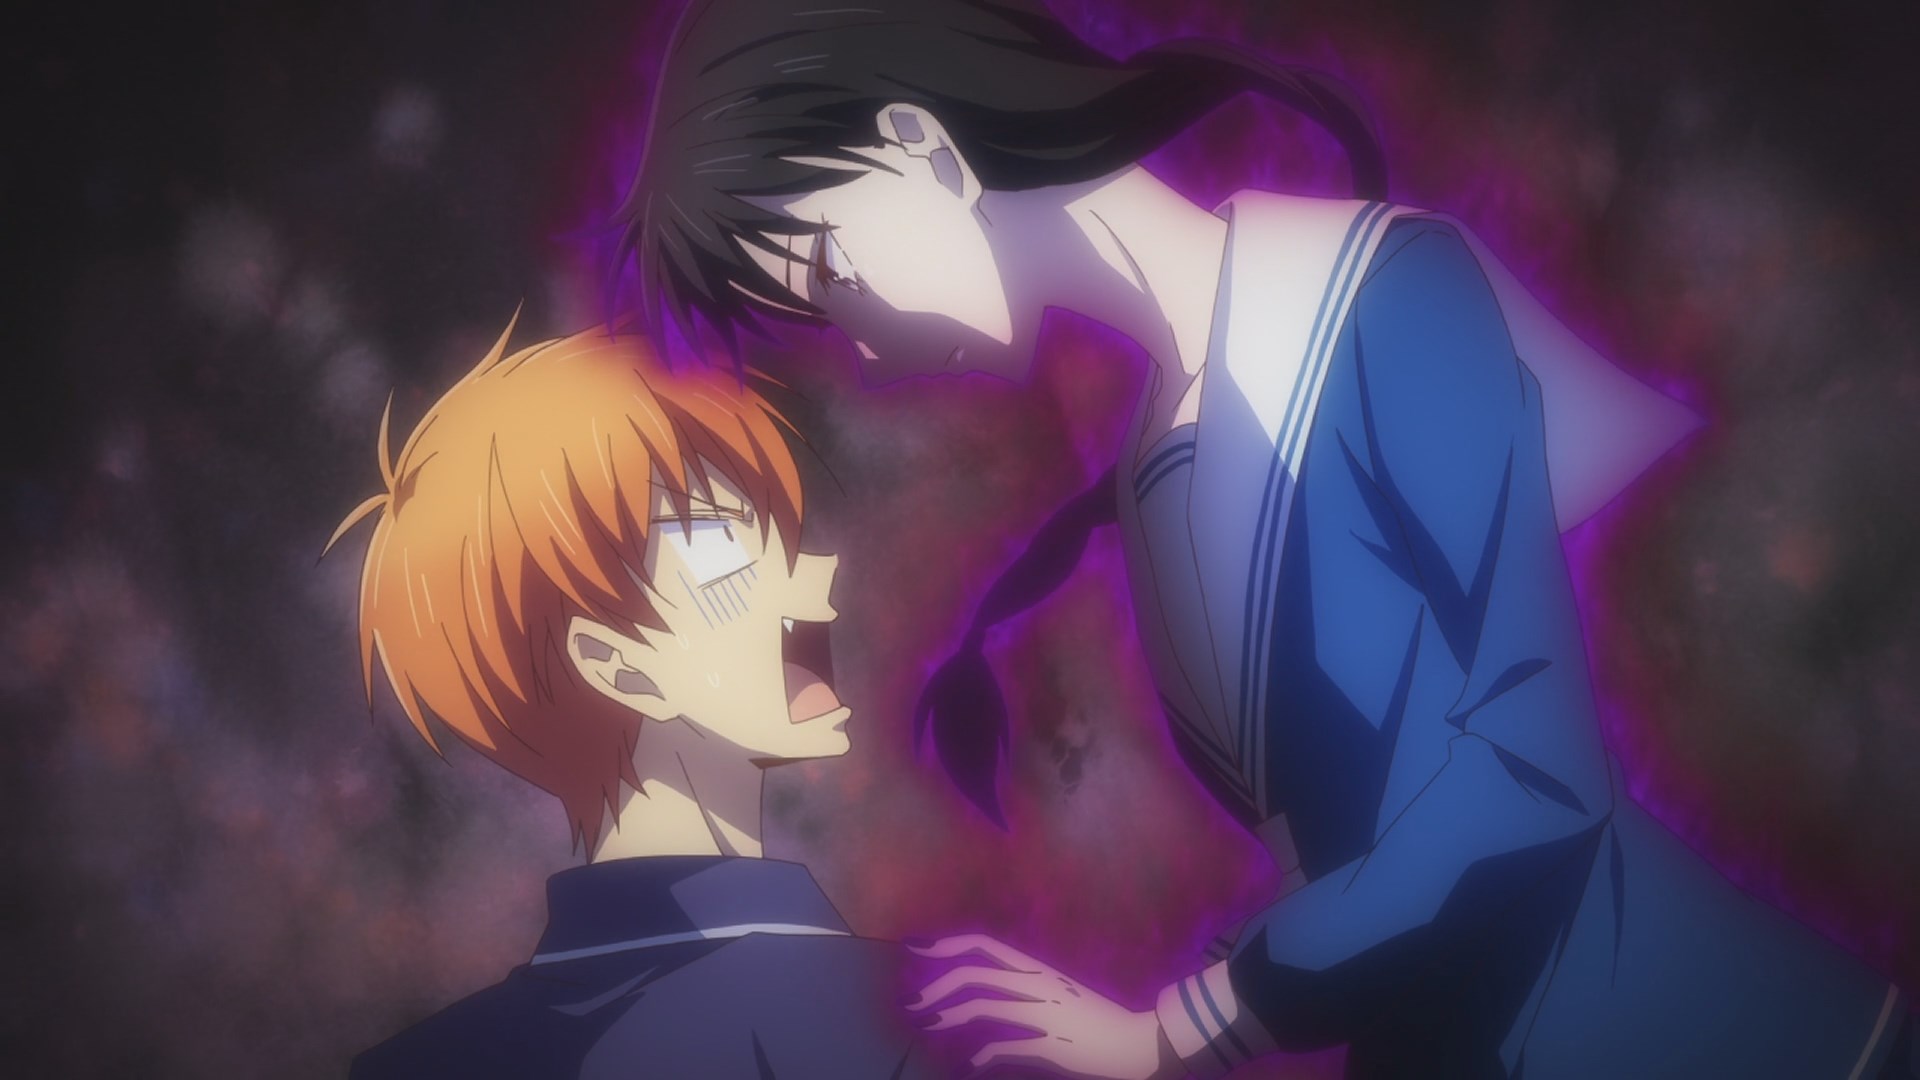 Fruits Basket (2019) Episode 2 Review – Sapphire Anime